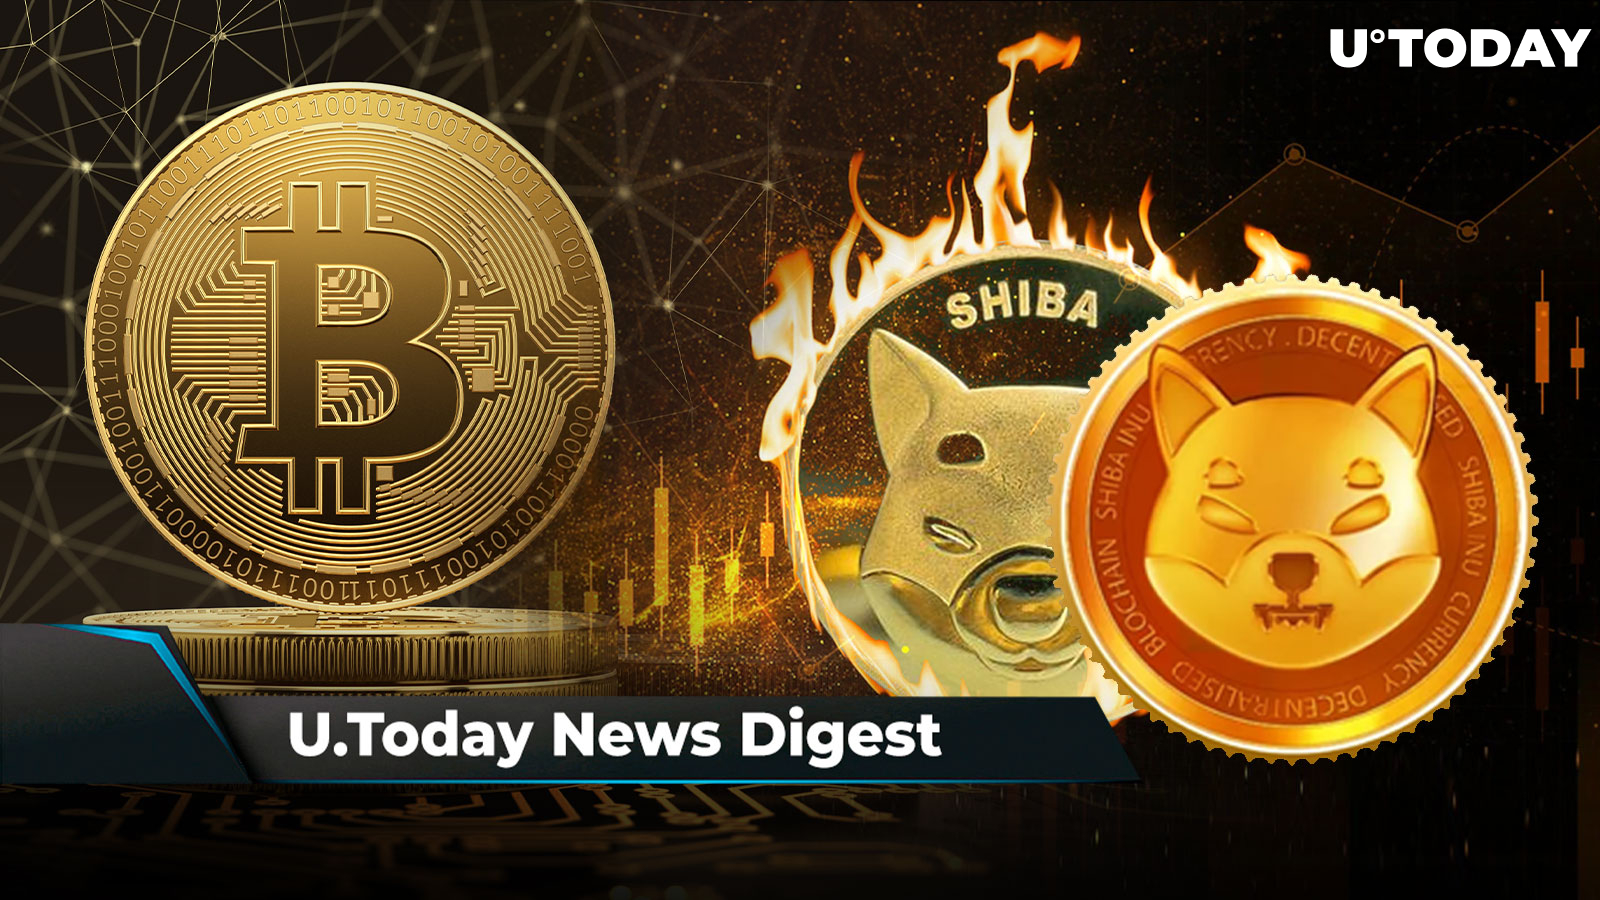 BTC Jumps Back Above $17,000, FLR Tokens Airdropped to XRP Holders, Trillions of SHIB to Be Burned Once Shibarium Launches: Crypto News Digest by U.Today